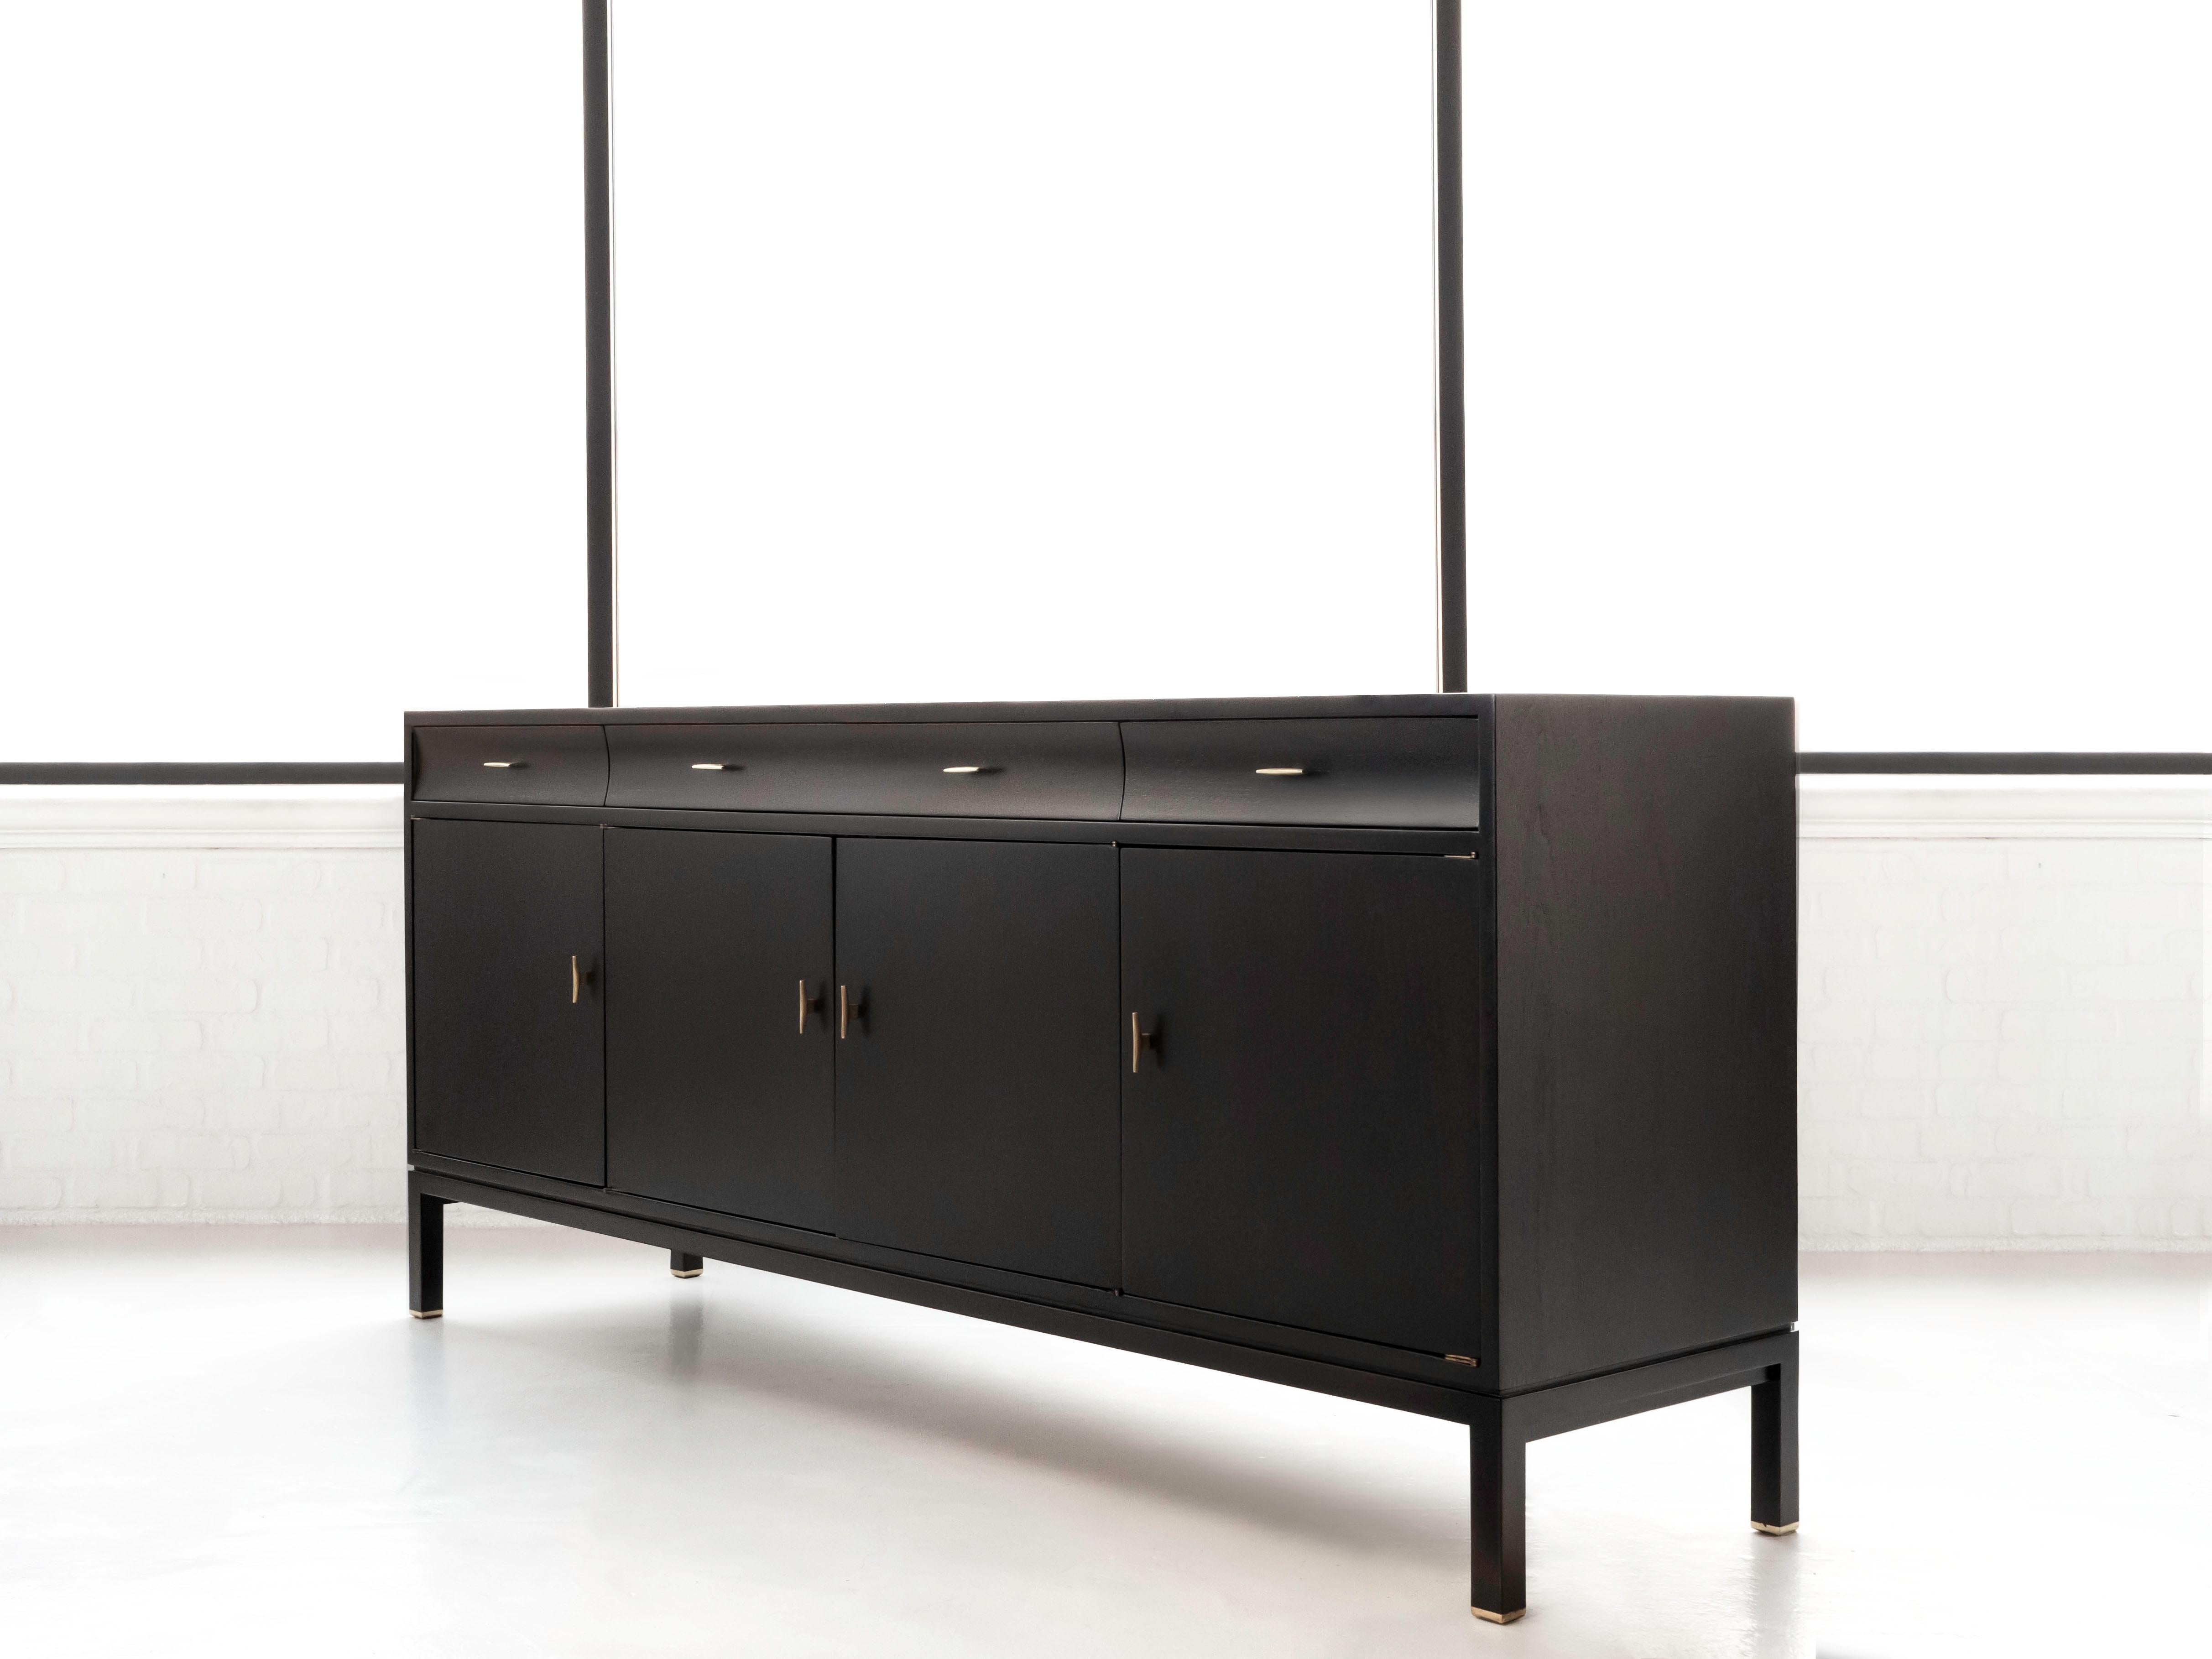 Edward Wormley sideboard / credenza in ebonized walnut.  Made for Dunbar and signed on the interior draw.  This piece has been fully refinished, the ebonized wood shows very nice.  The walnut underneath creates a dark espresso tone.

Solid brass